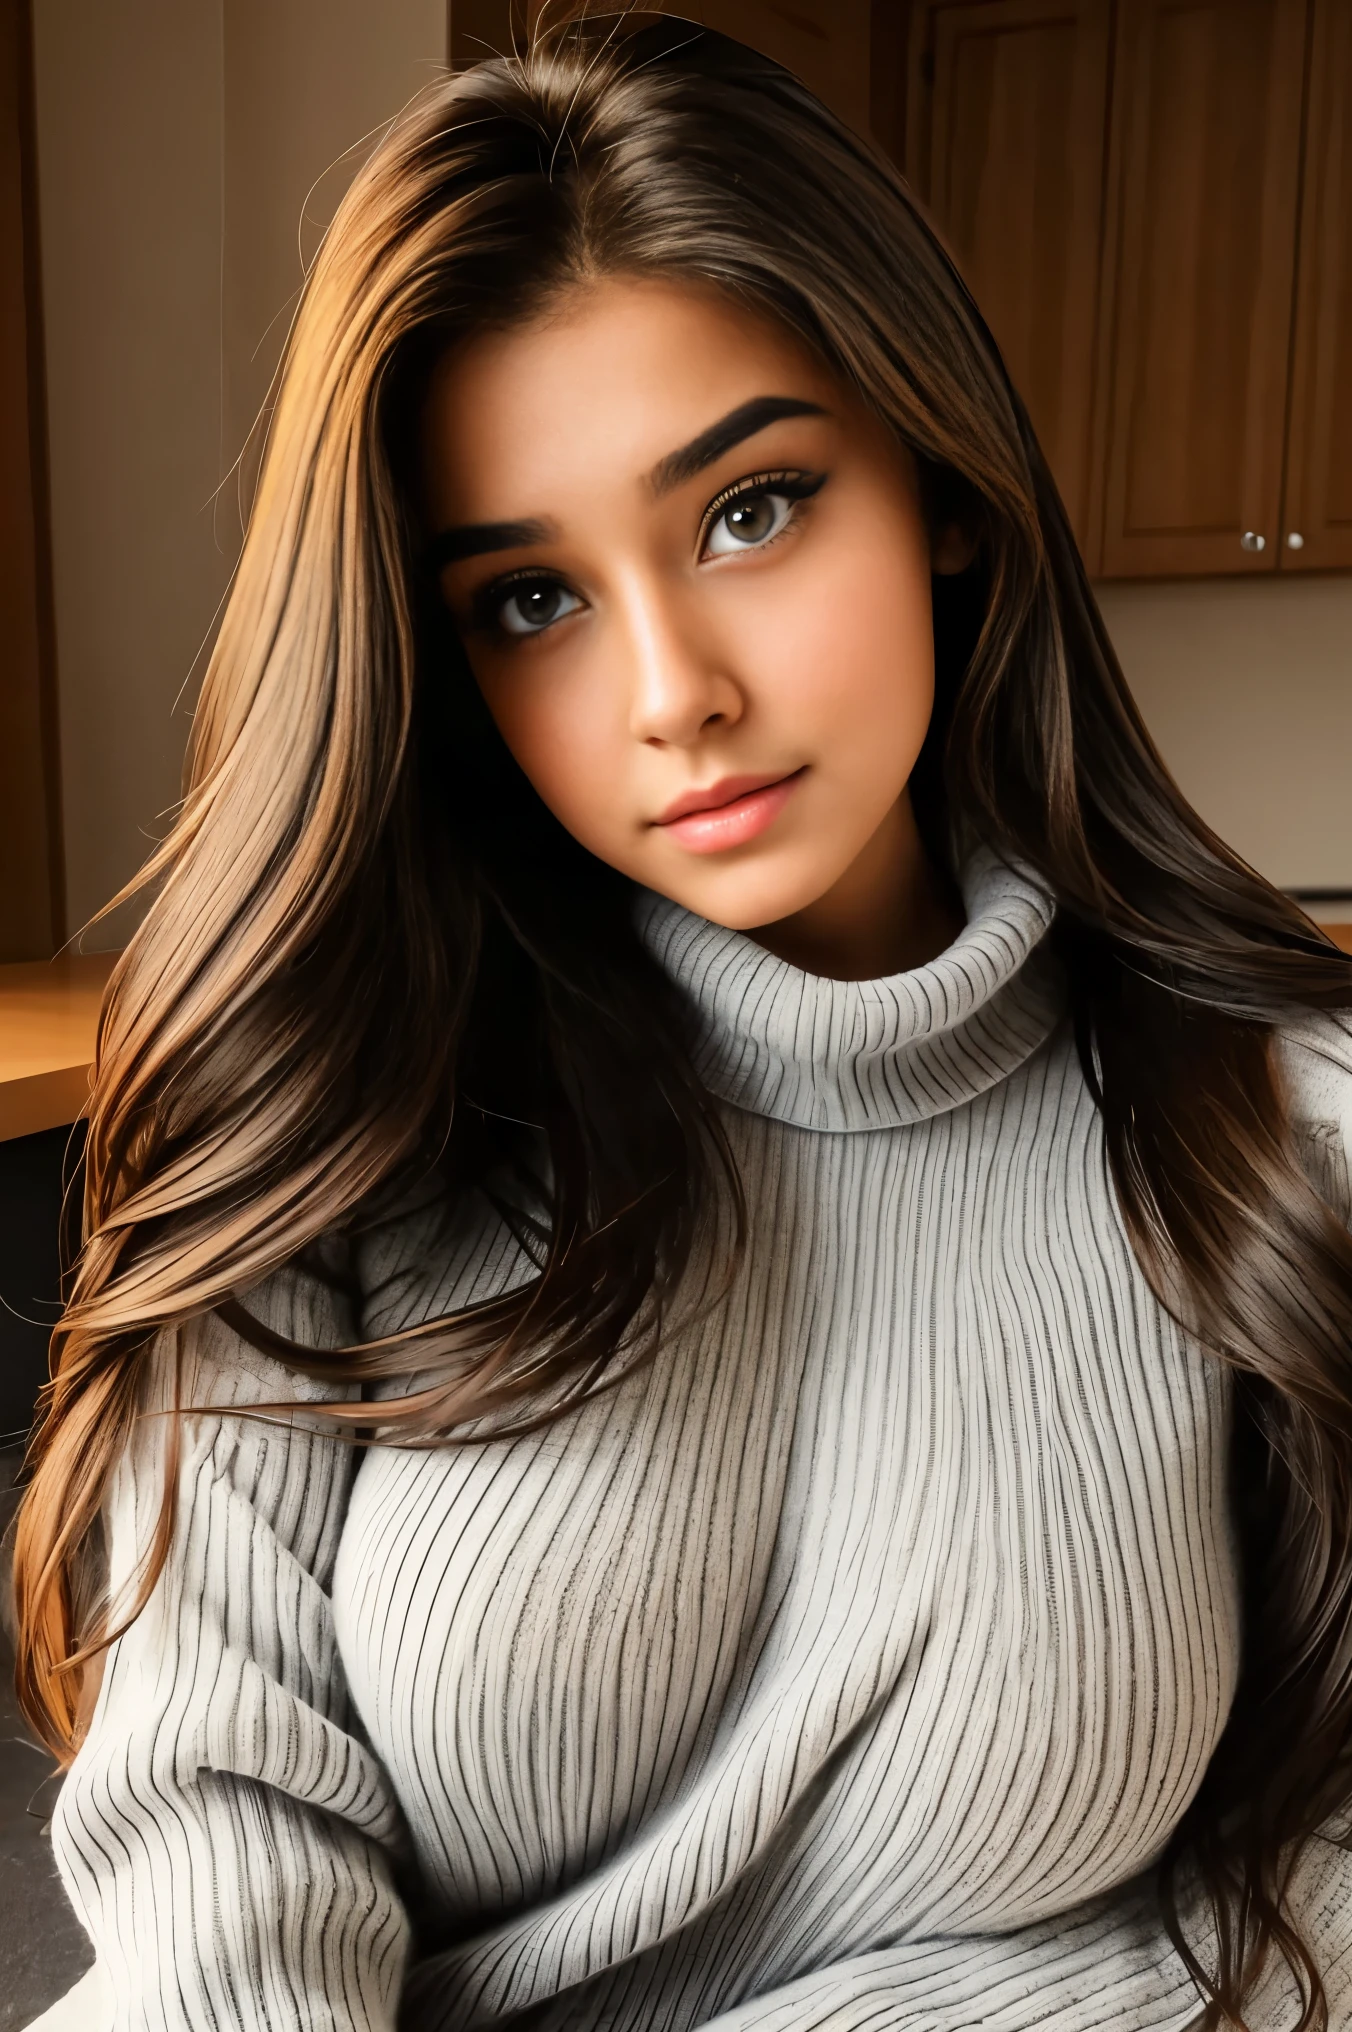 Girl 17 years old beautiful Big breasts sweater with a large neckline room  large desk sitting